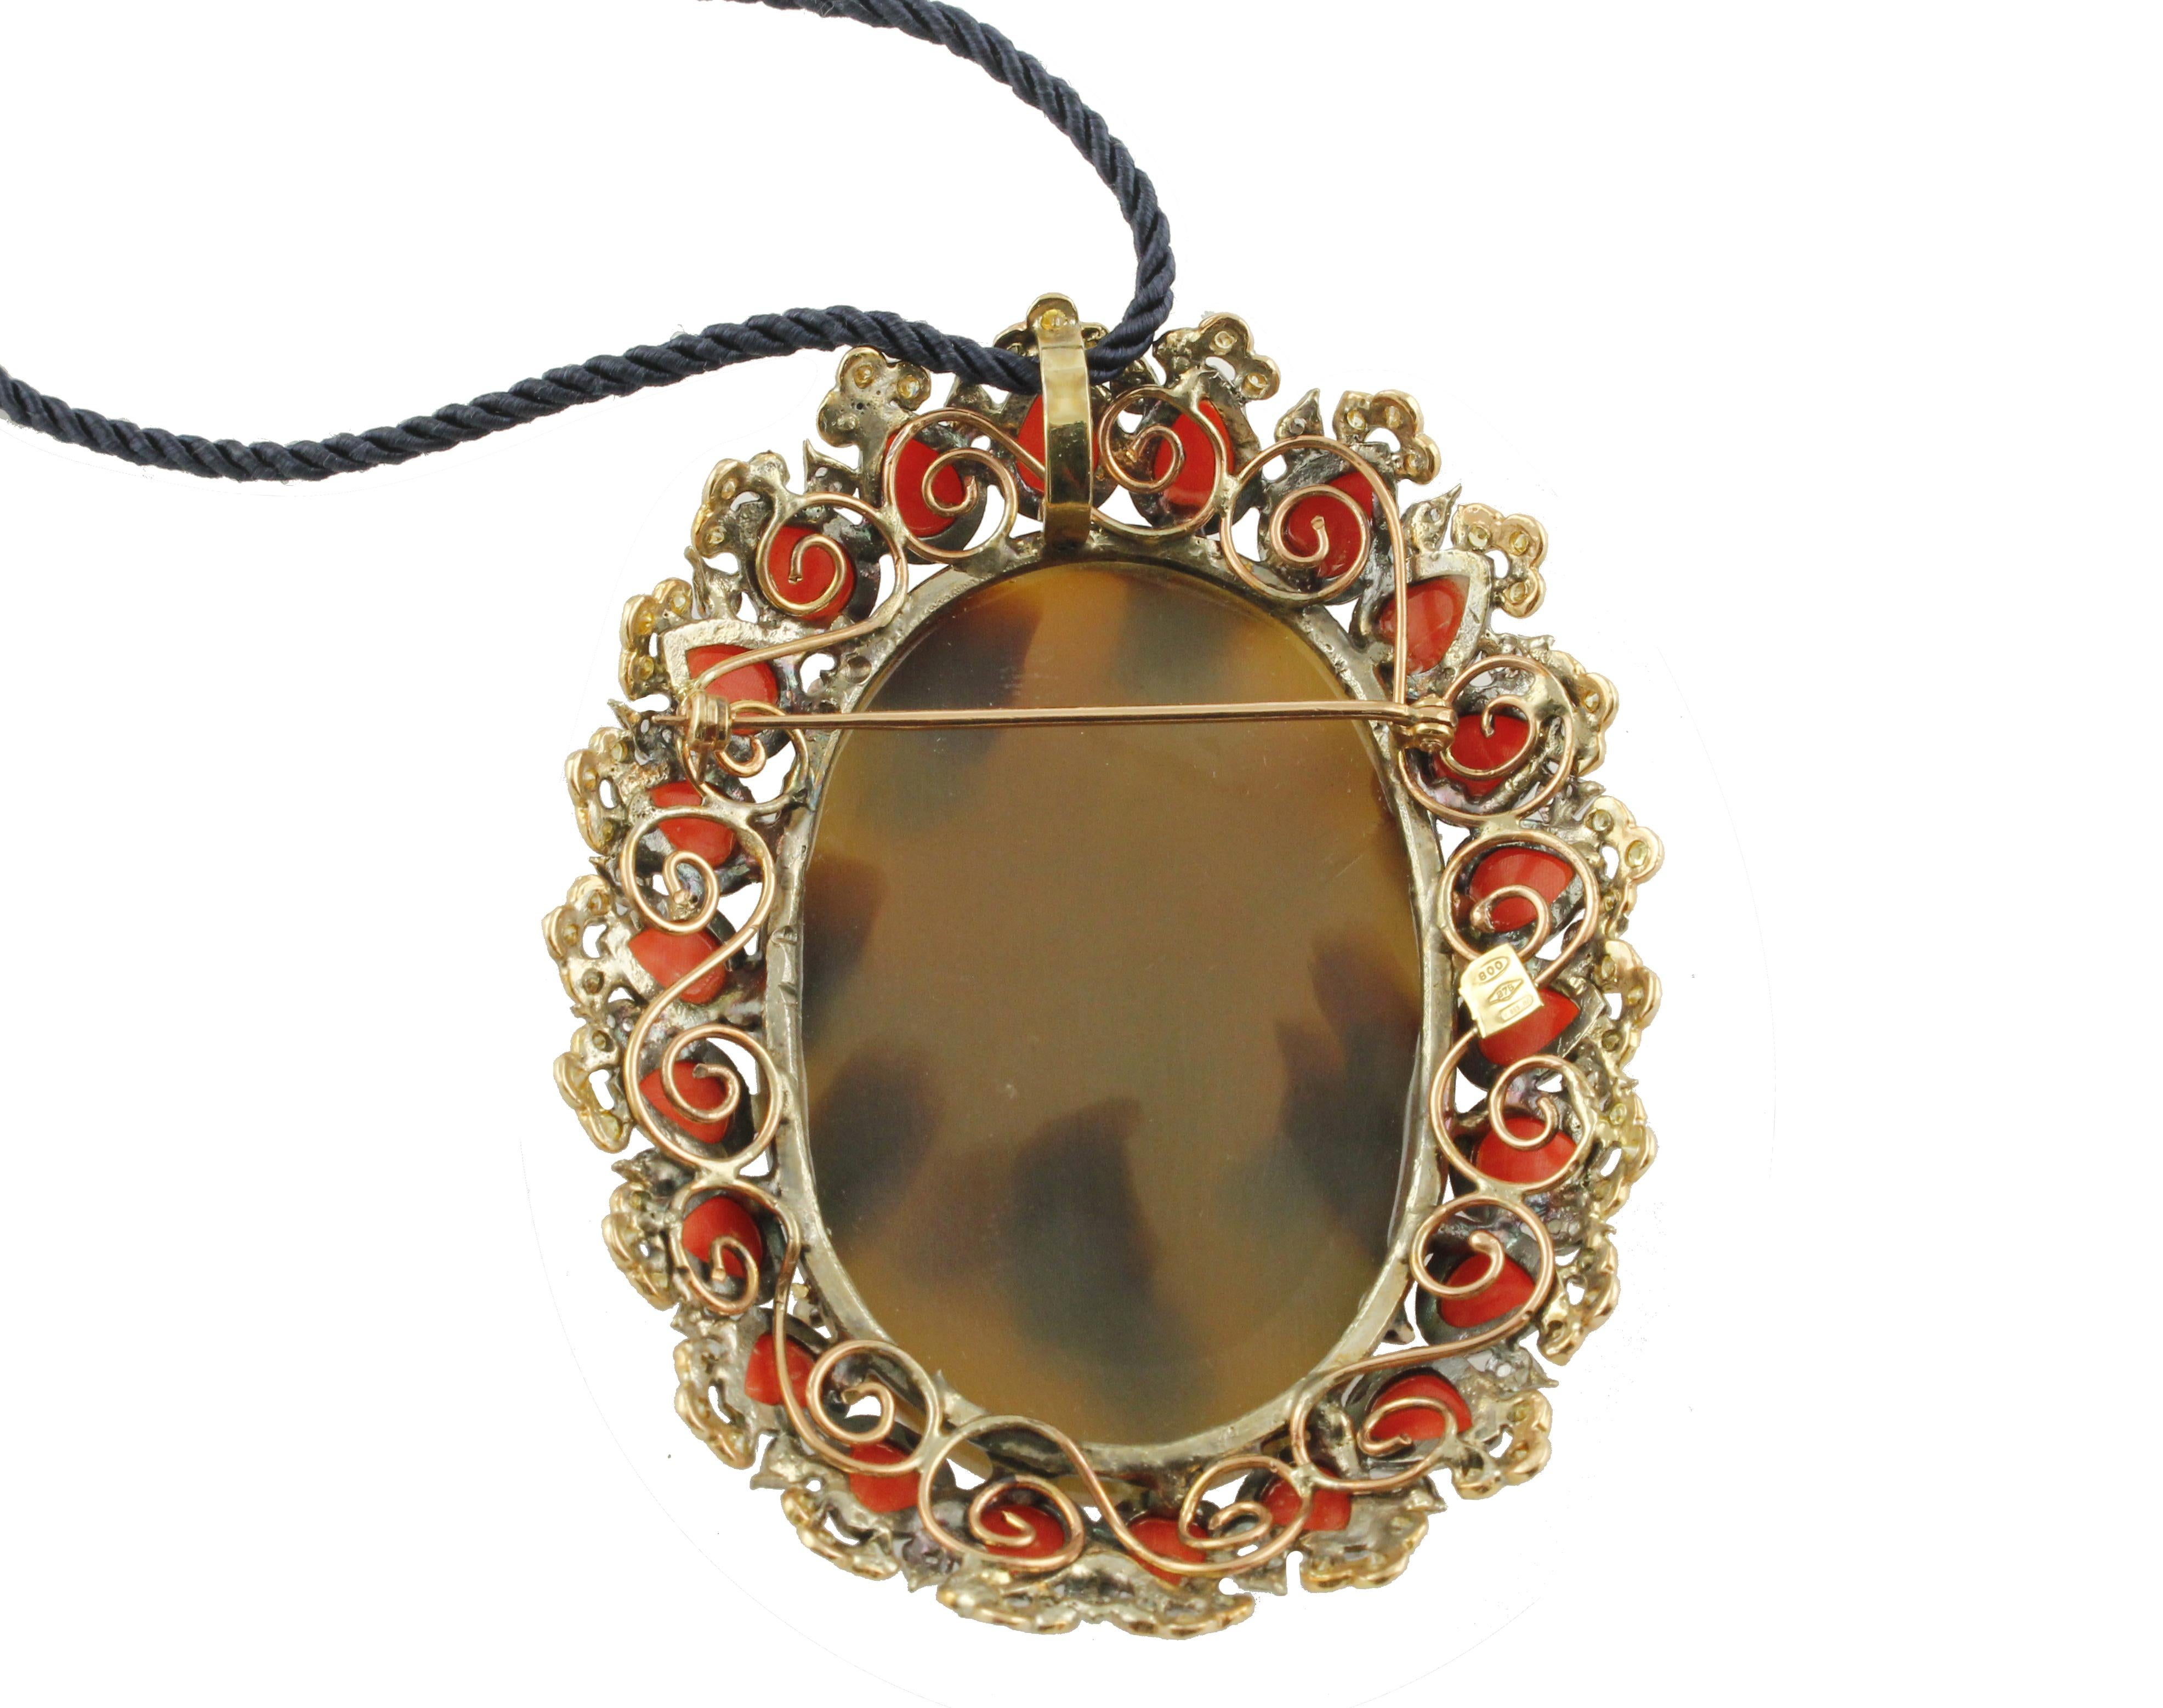 Retro Diamonds, Yellow Sapphires, Red Coral Drops, Gold Silver Pendant Necklace/Brooch For Sale